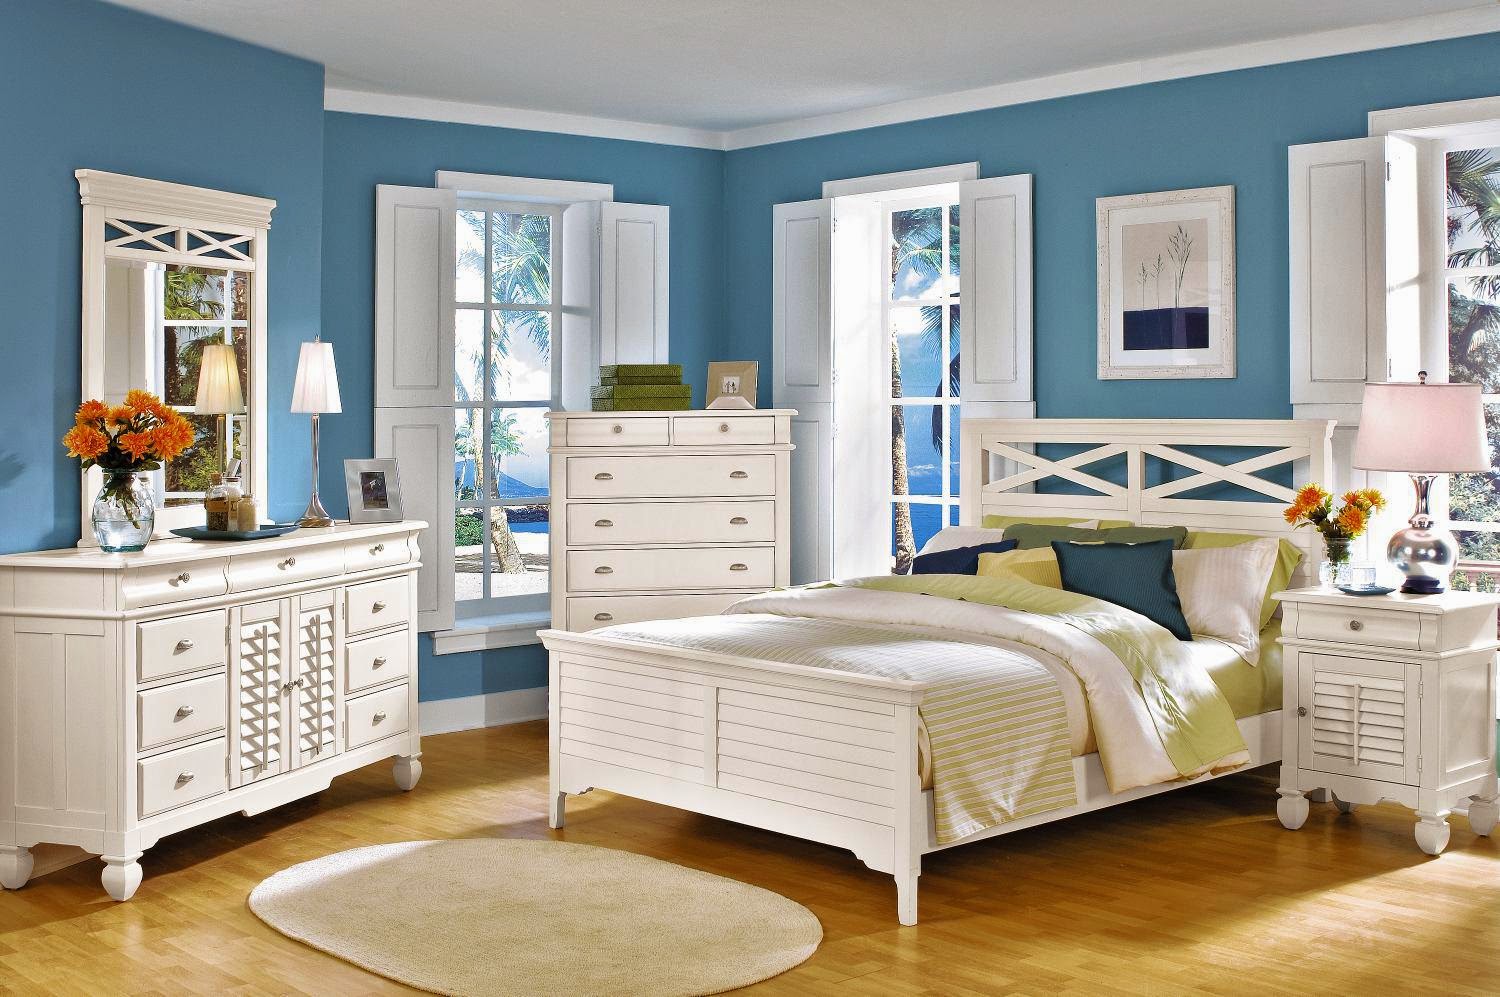 Decorating Ideas For A Blue Bedroom